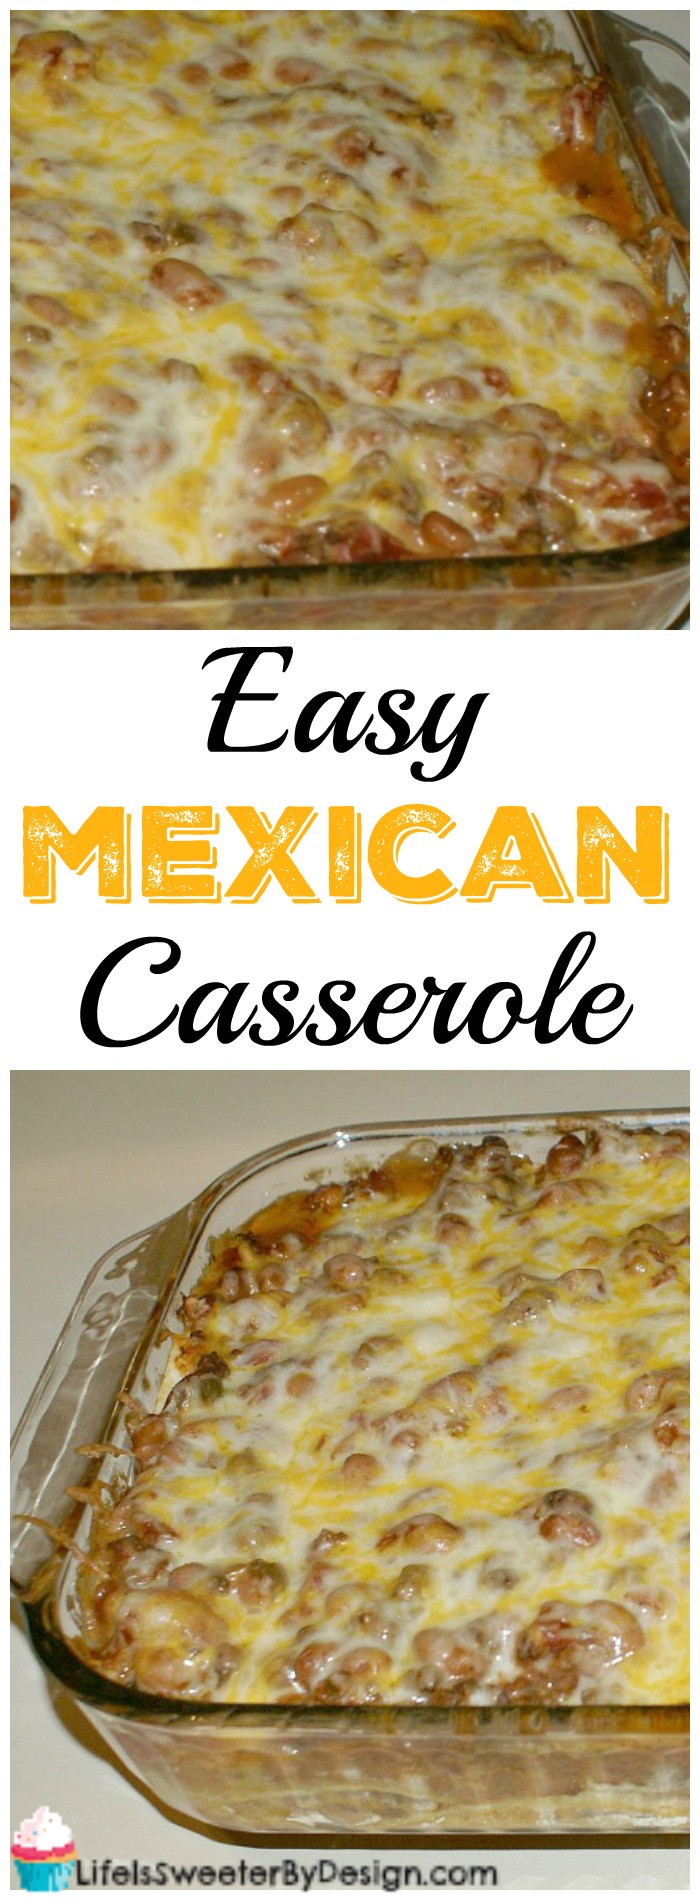 Easy Mexican Casserole
 Easy to Adapt Mexican Casserole Life is Sweeter By Design